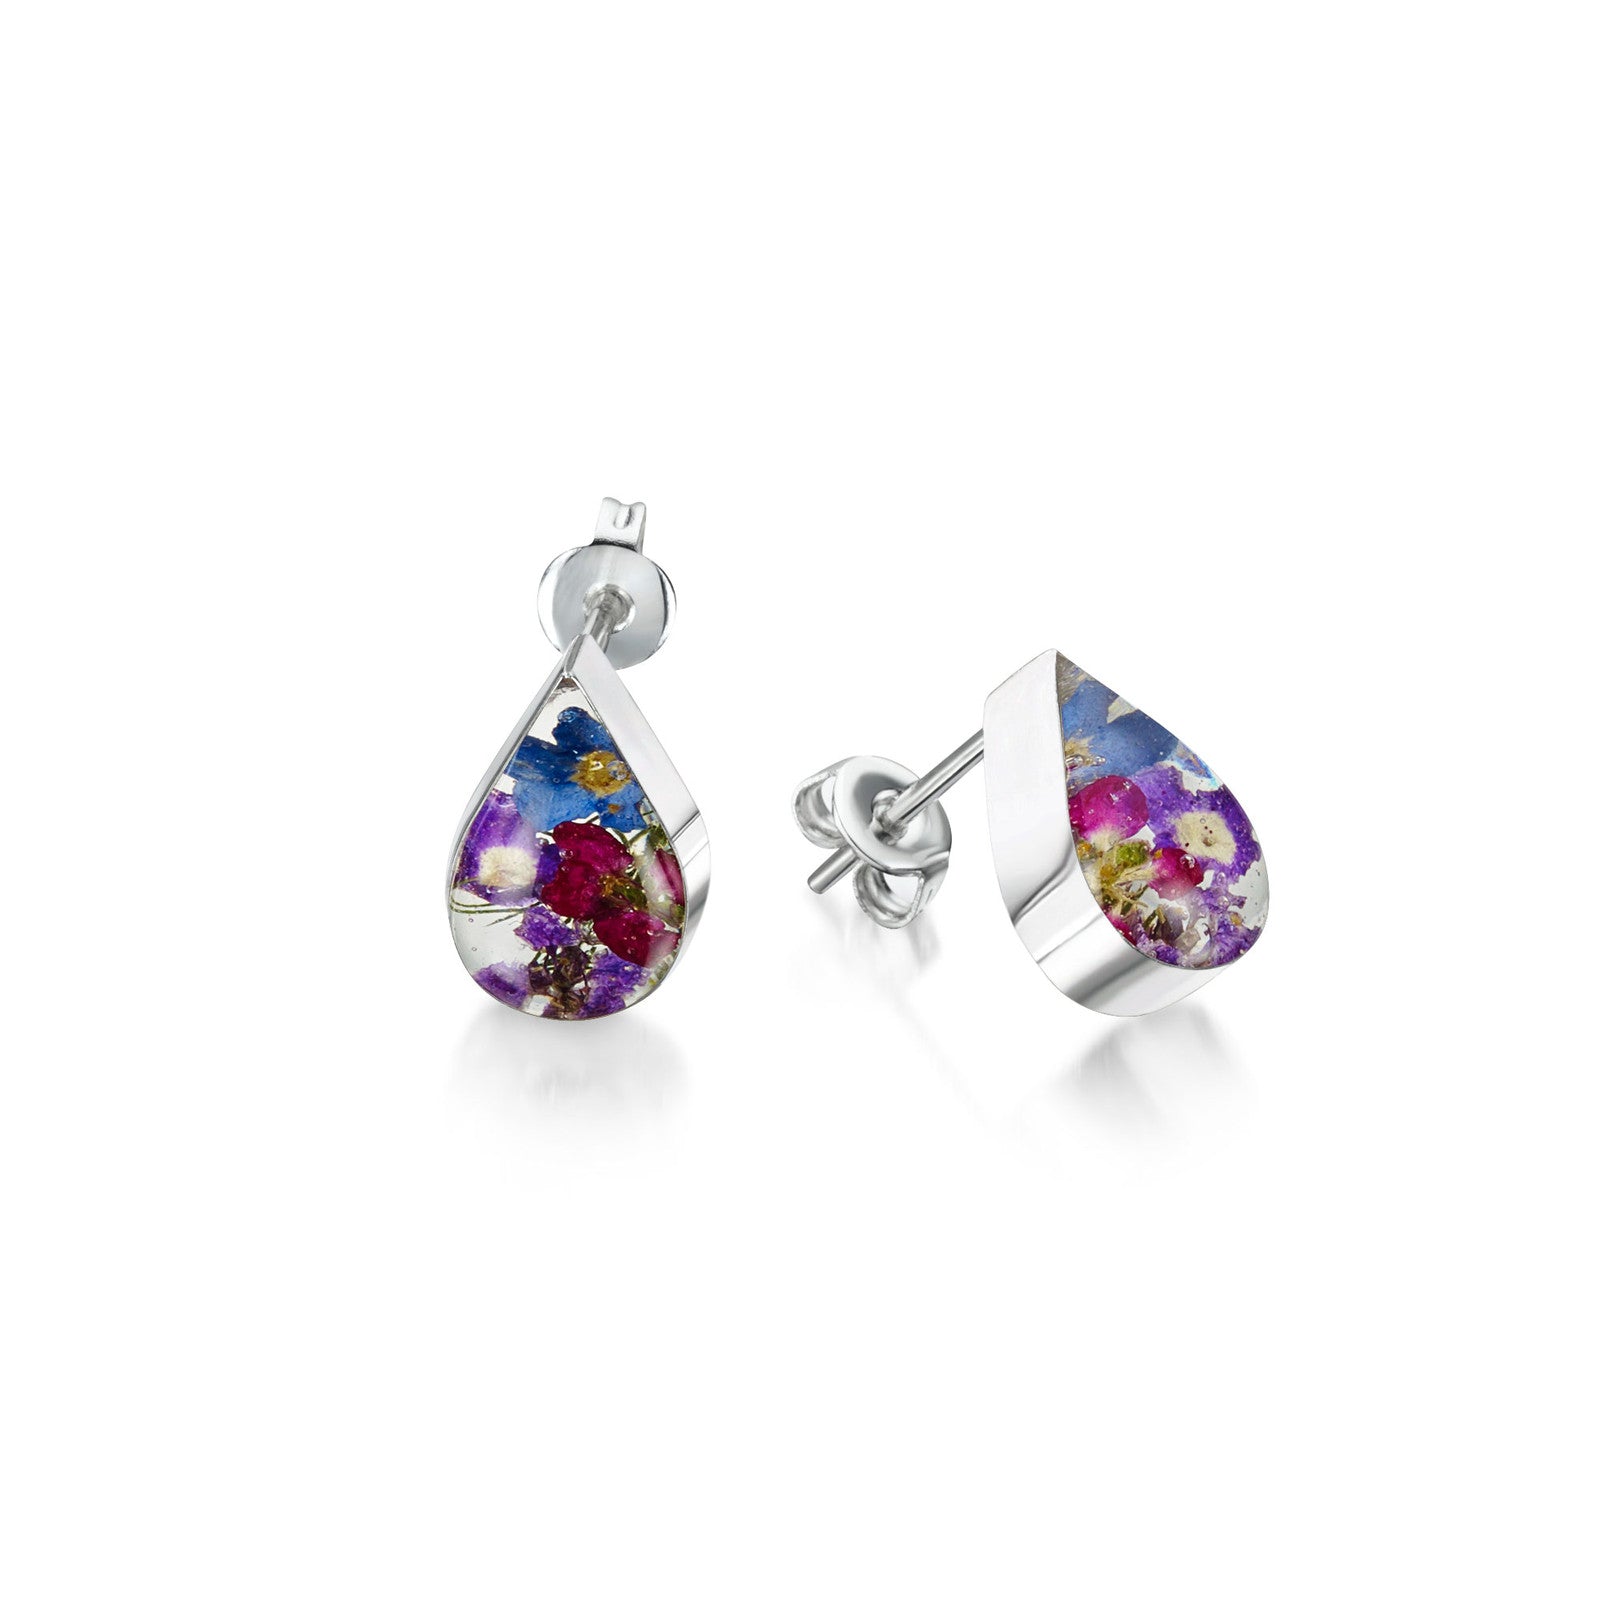 Flower Earrings - Sterling silver - BLE03 - Hallmark Jewellers Formby & The Jewellers Bench Widnes